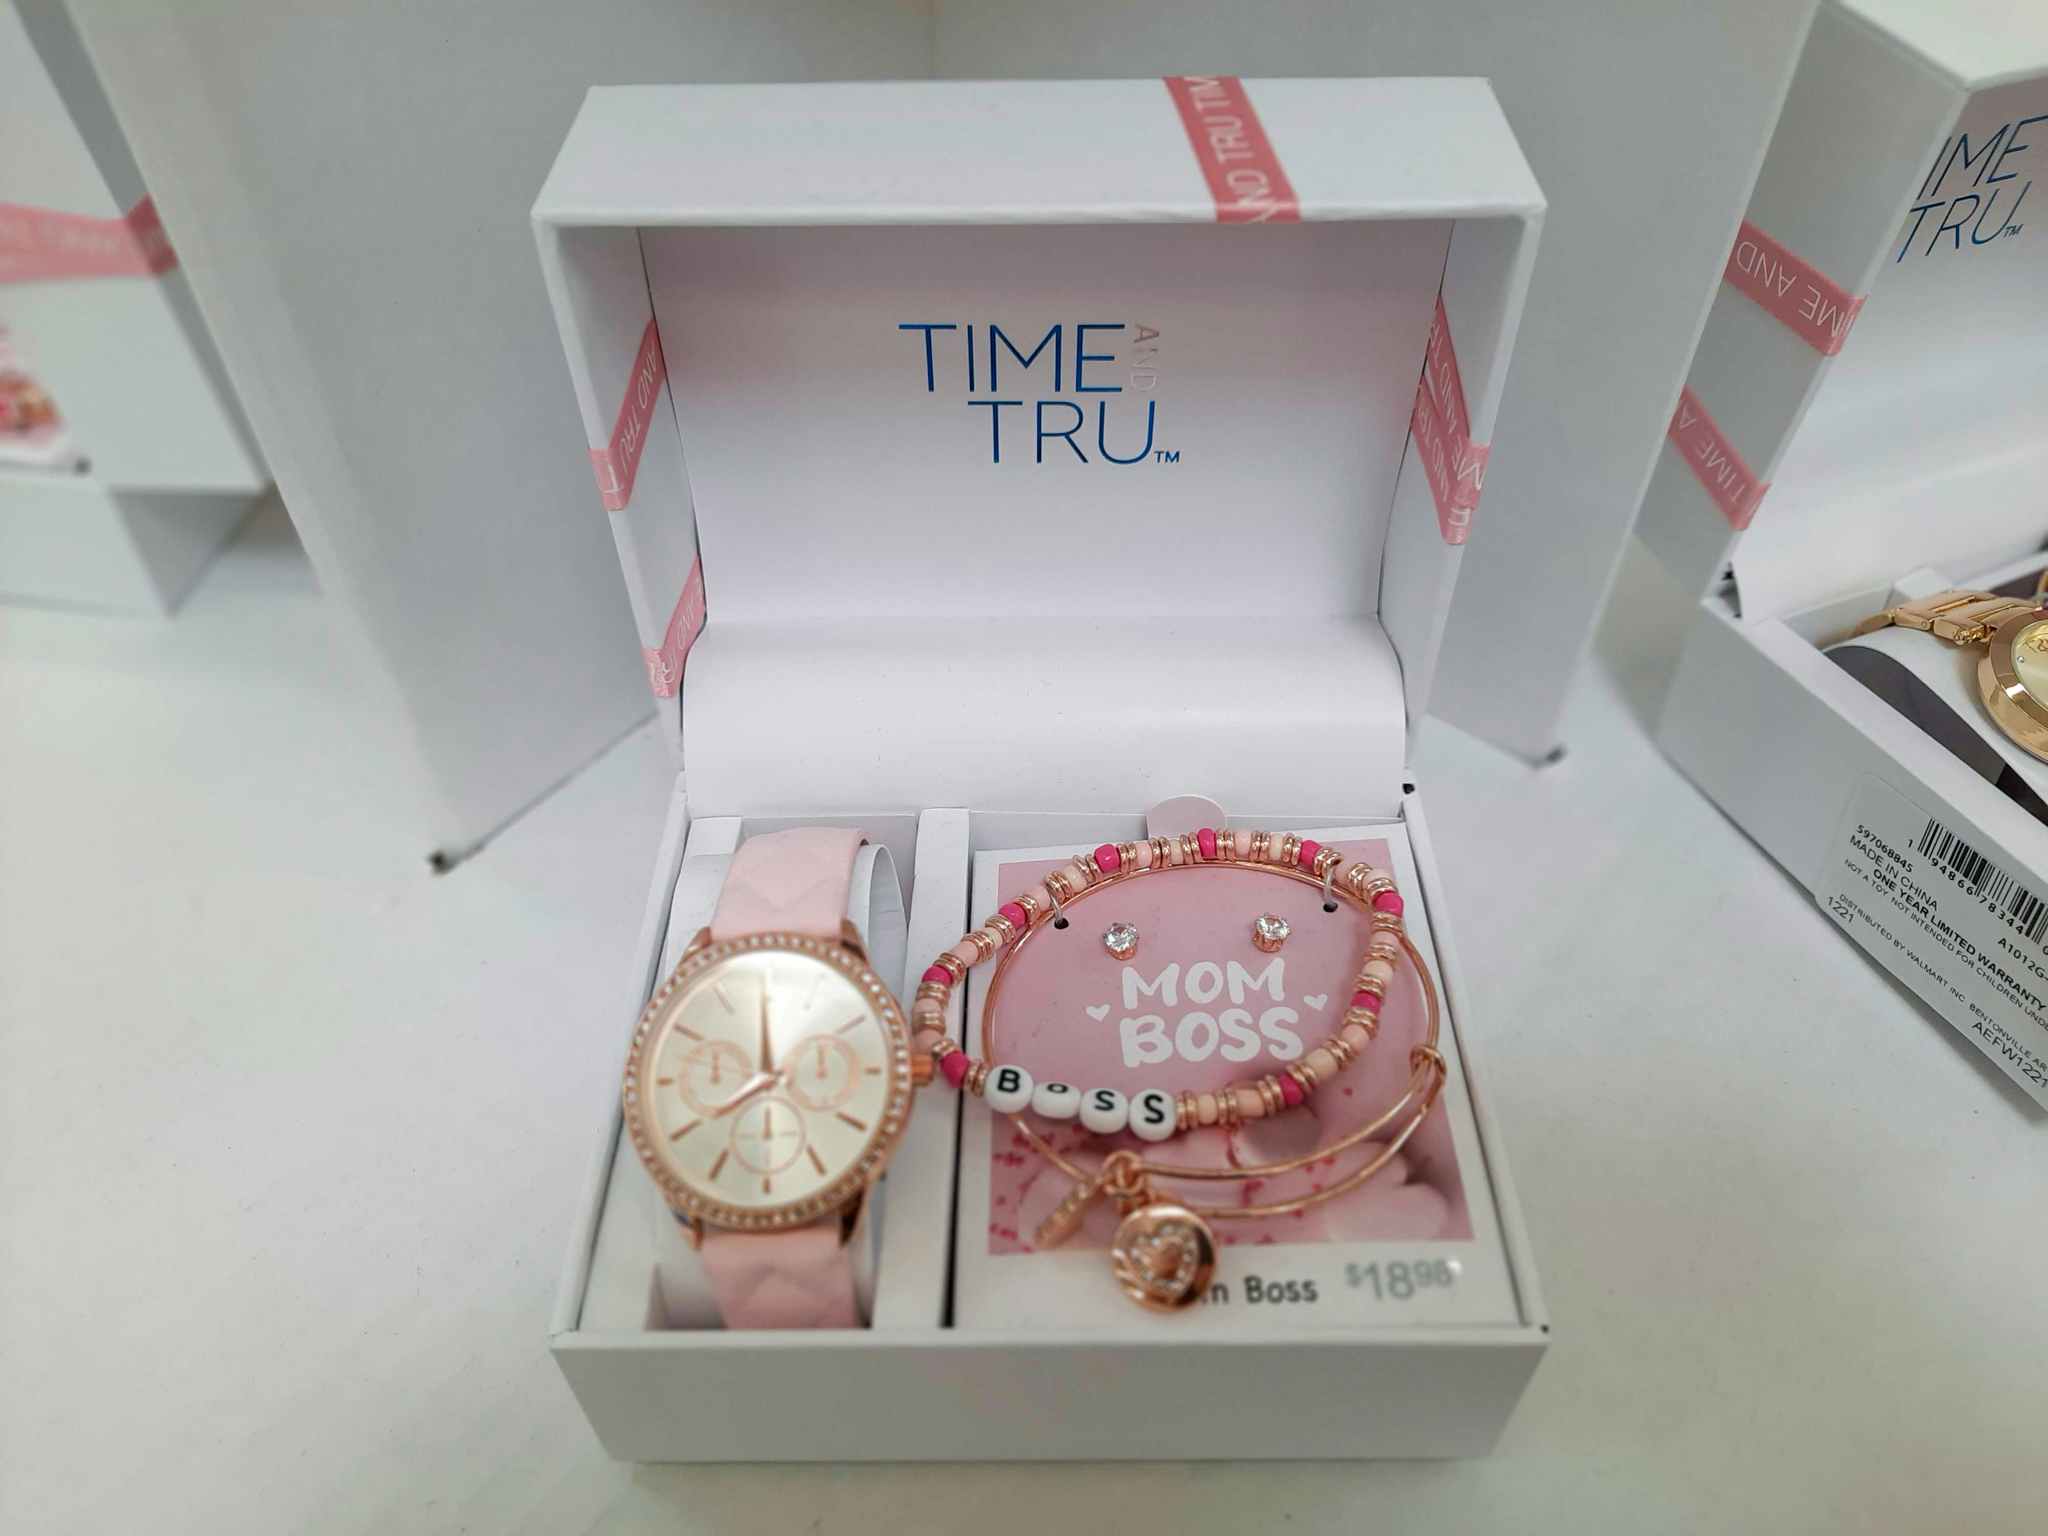 walmart mothers day clearance time and tru mom boss watch on display